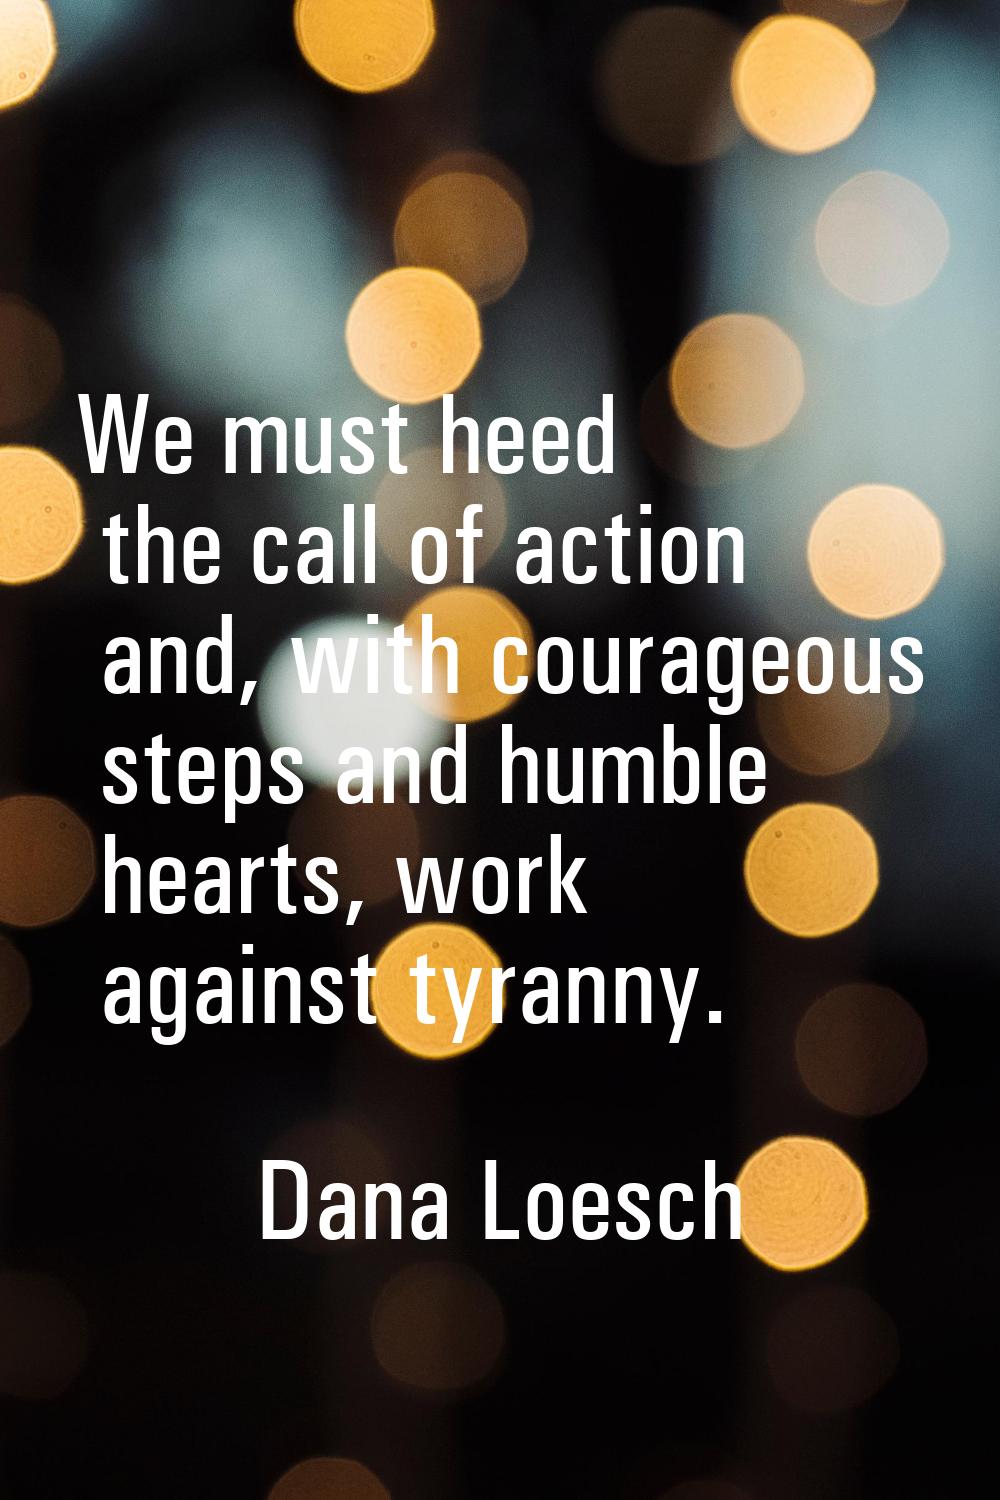 We must heed the call of action and, with courageous steps and humble hearts, work against tyranny.